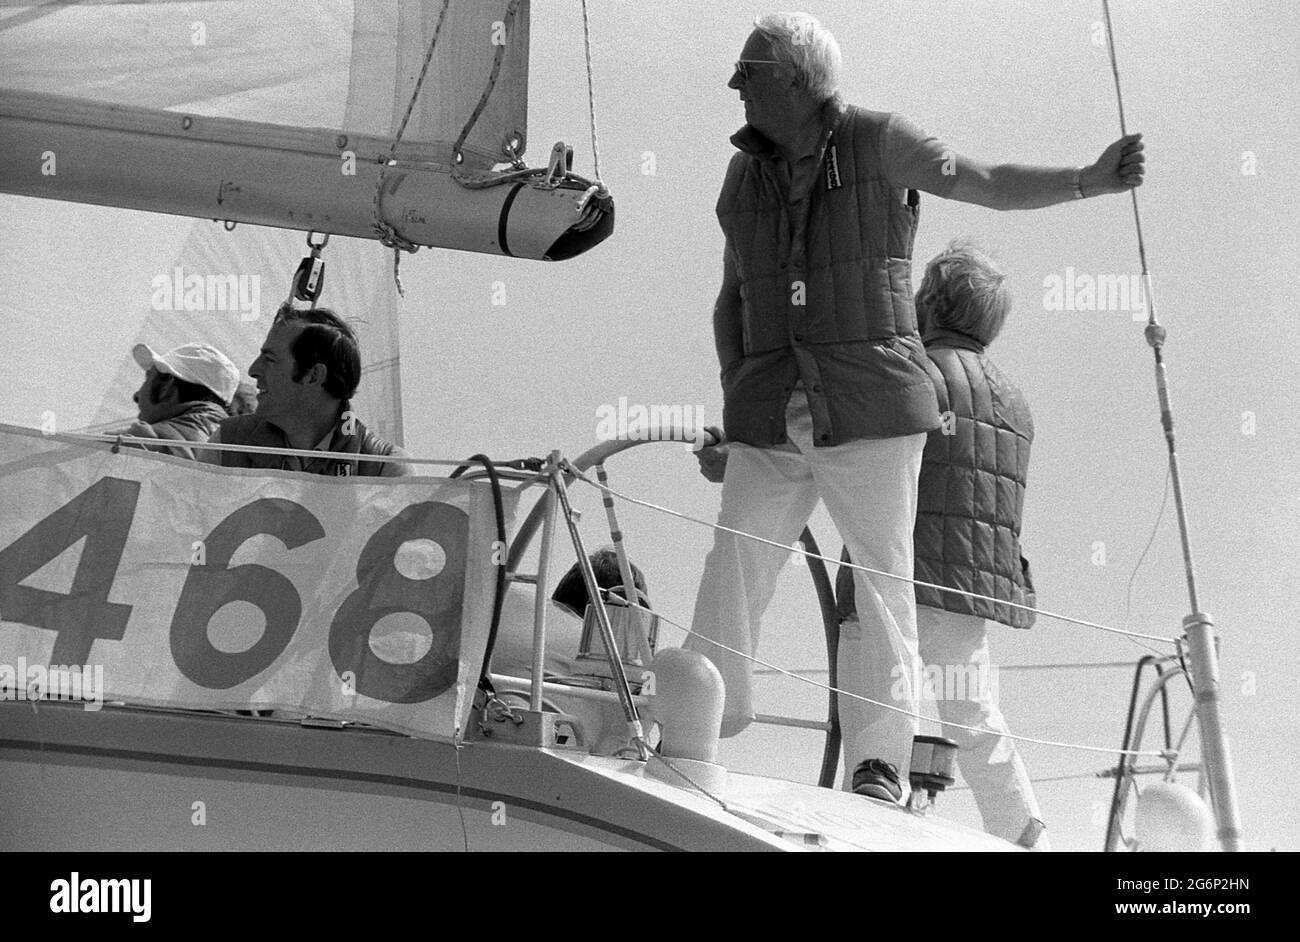 AJAXNETPHOTO. 7TH JULY,1979. SOLENT, COWES, ENGLAND. - KEEPING LOOKOUT - EDWARD HEATH STANDING LOOKOUT IN THE STERNSHEETS OF HIS YACHT MORNING CLOUD AT THE START OF THE COWES - DINARD OFFSHORE RACE.  PHOTO:JONATHAN EASTLAND/AJAX REF:2790707 23 13 Stock Photo